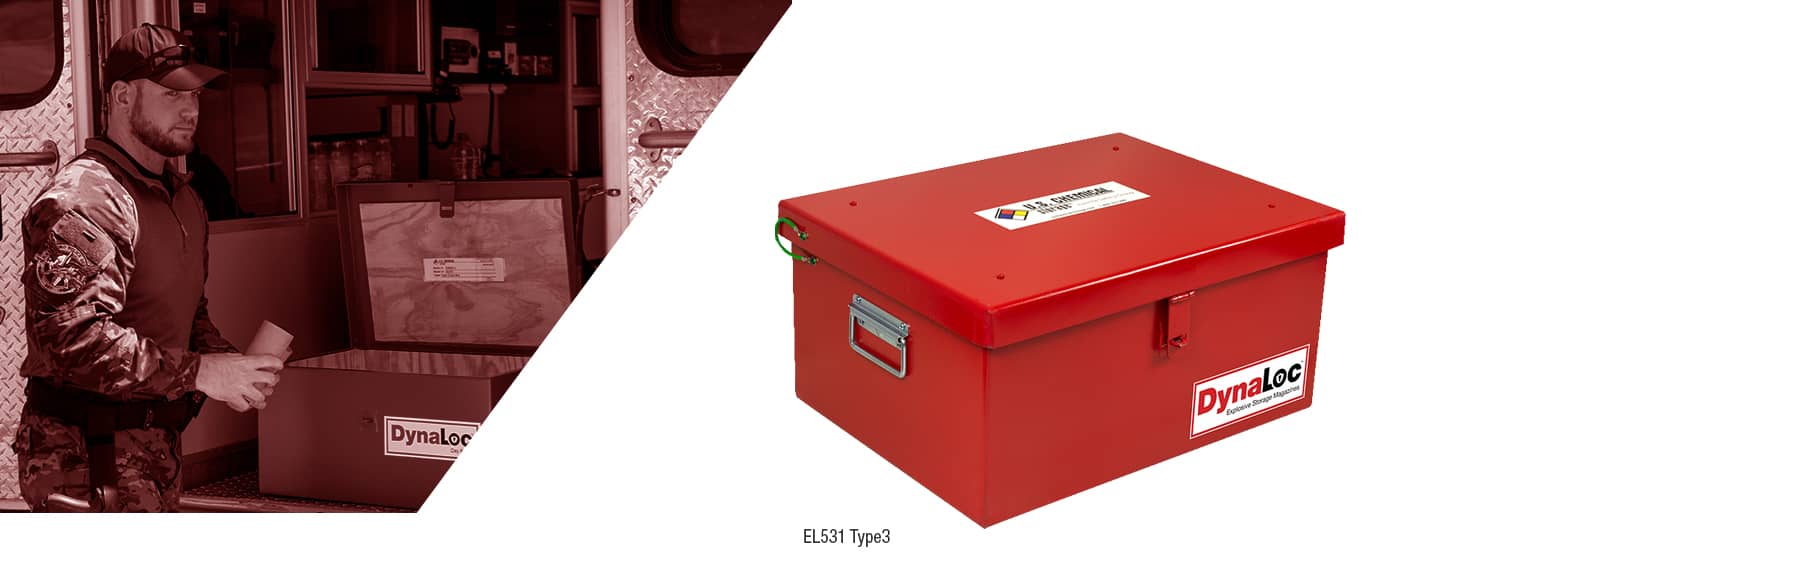 DynaLoc™ Type 3 Day box for Explosives